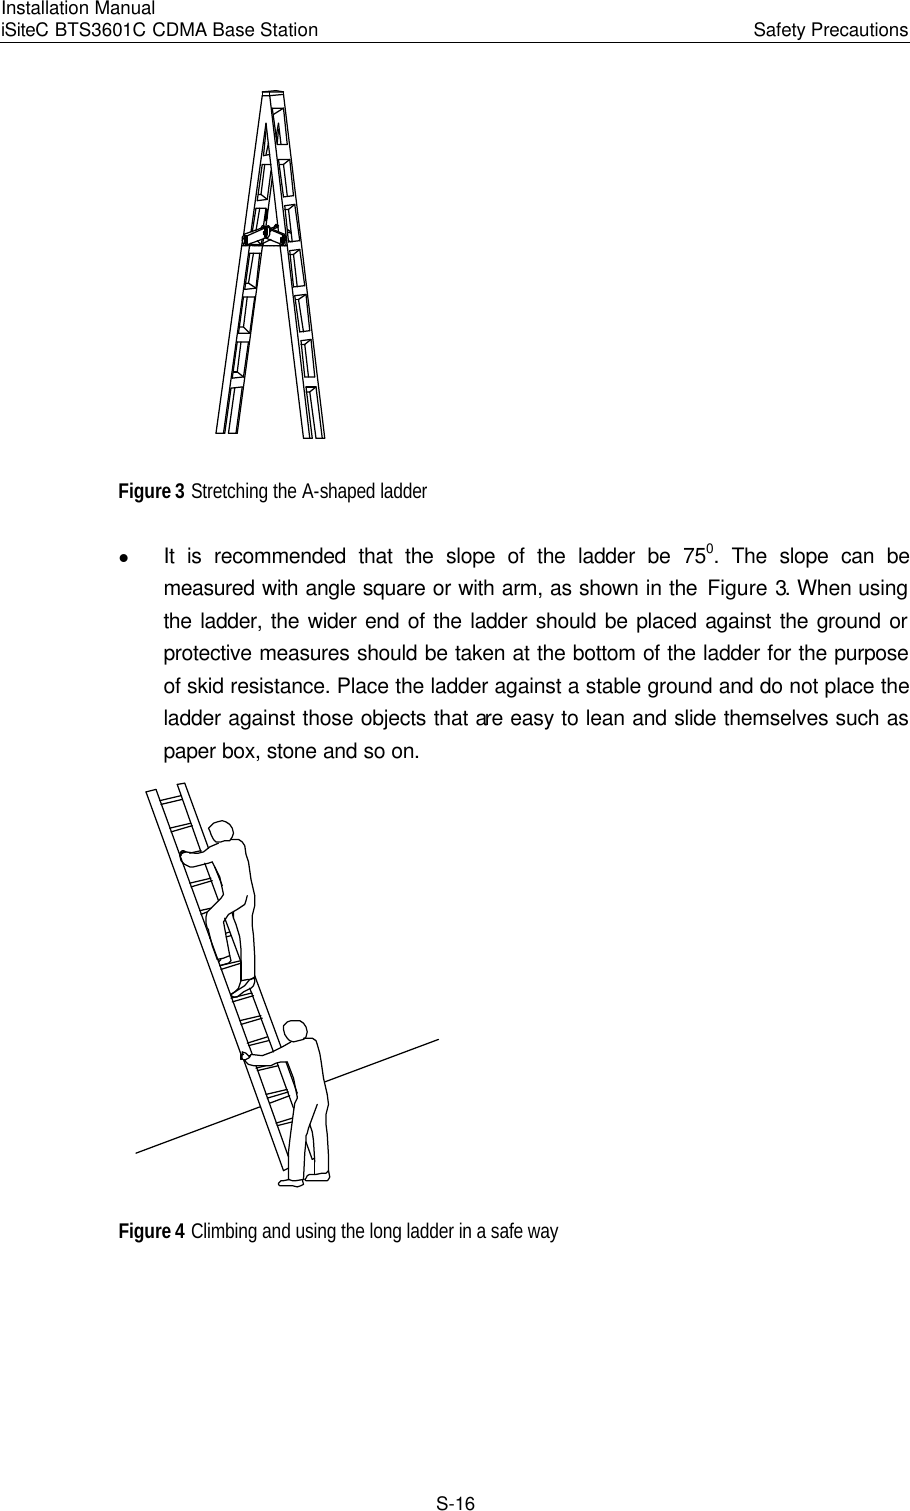 Installation Manual   iSiteC BTS3601C CDMA Base Station Safety Precautions　S-16  Figure 3 Stretching the A-shaped ladder   l It is recommended that the slope of the ladder be 750. The slope can be measured with angle square or with arm, as shown in the Figure 3. When using the ladder, the wider end of the ladder should be placed against the ground or protective measures should be taken at the bottom of the ladder for the purpose of skid resistance. Place the ladder against a stable ground and do not place the ladder against those objects that are easy to lean and slide themselves such as paper box, stone and so on.  Figure 4 Climbing and using the long ladder in a safe way 